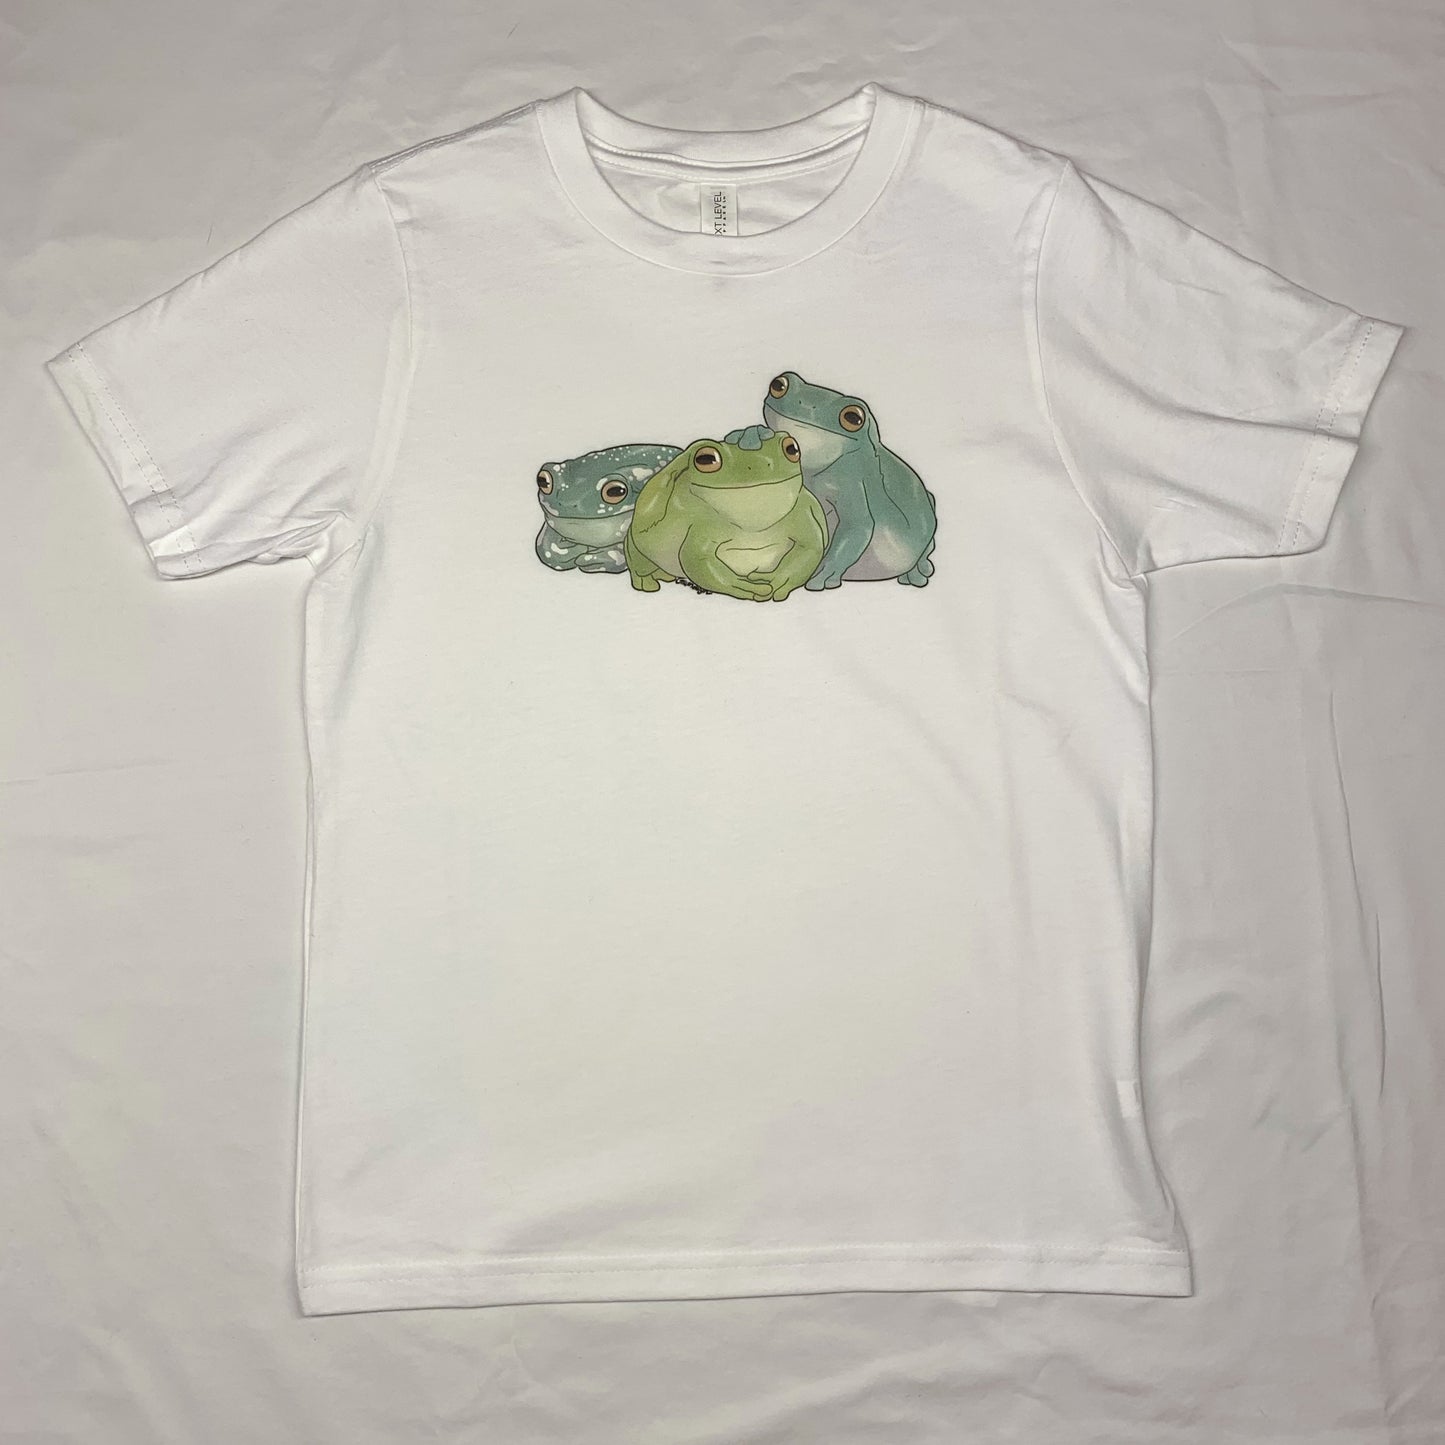 A white, short-sleeve t-shirt with an illustration of three white's tree frogs, each a different color variation, sitting side by side